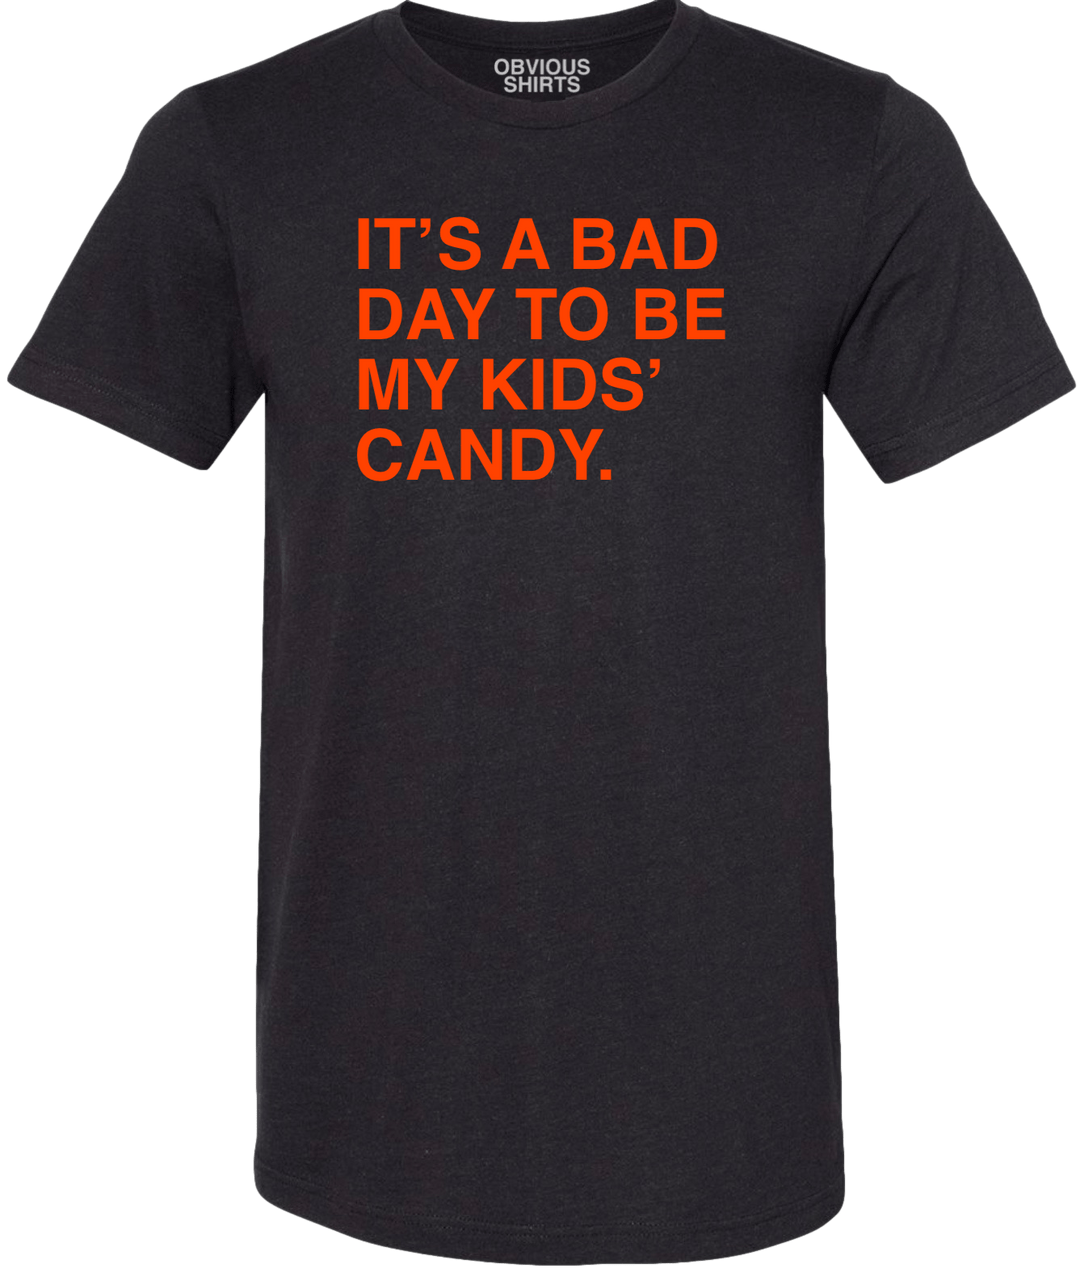 IT'S A BAD DAY TO BE MY KIDS' CANDY. - OBVIOUS SHIRTS